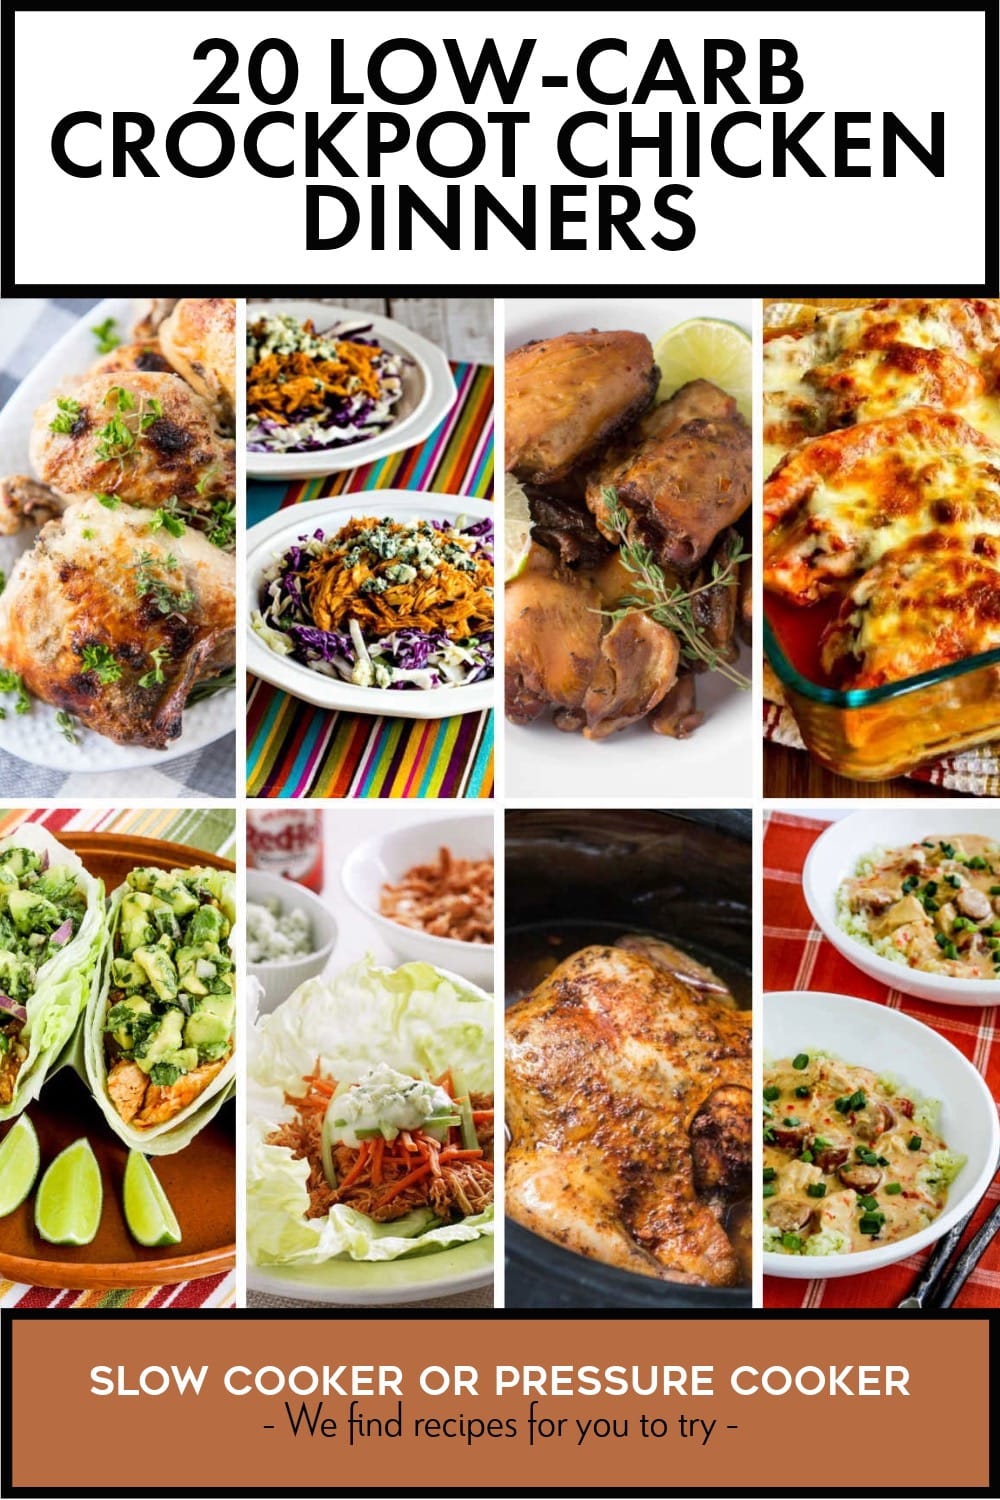 Pinterest image of 20 Low-Carb CrockPot Chicken Dinners